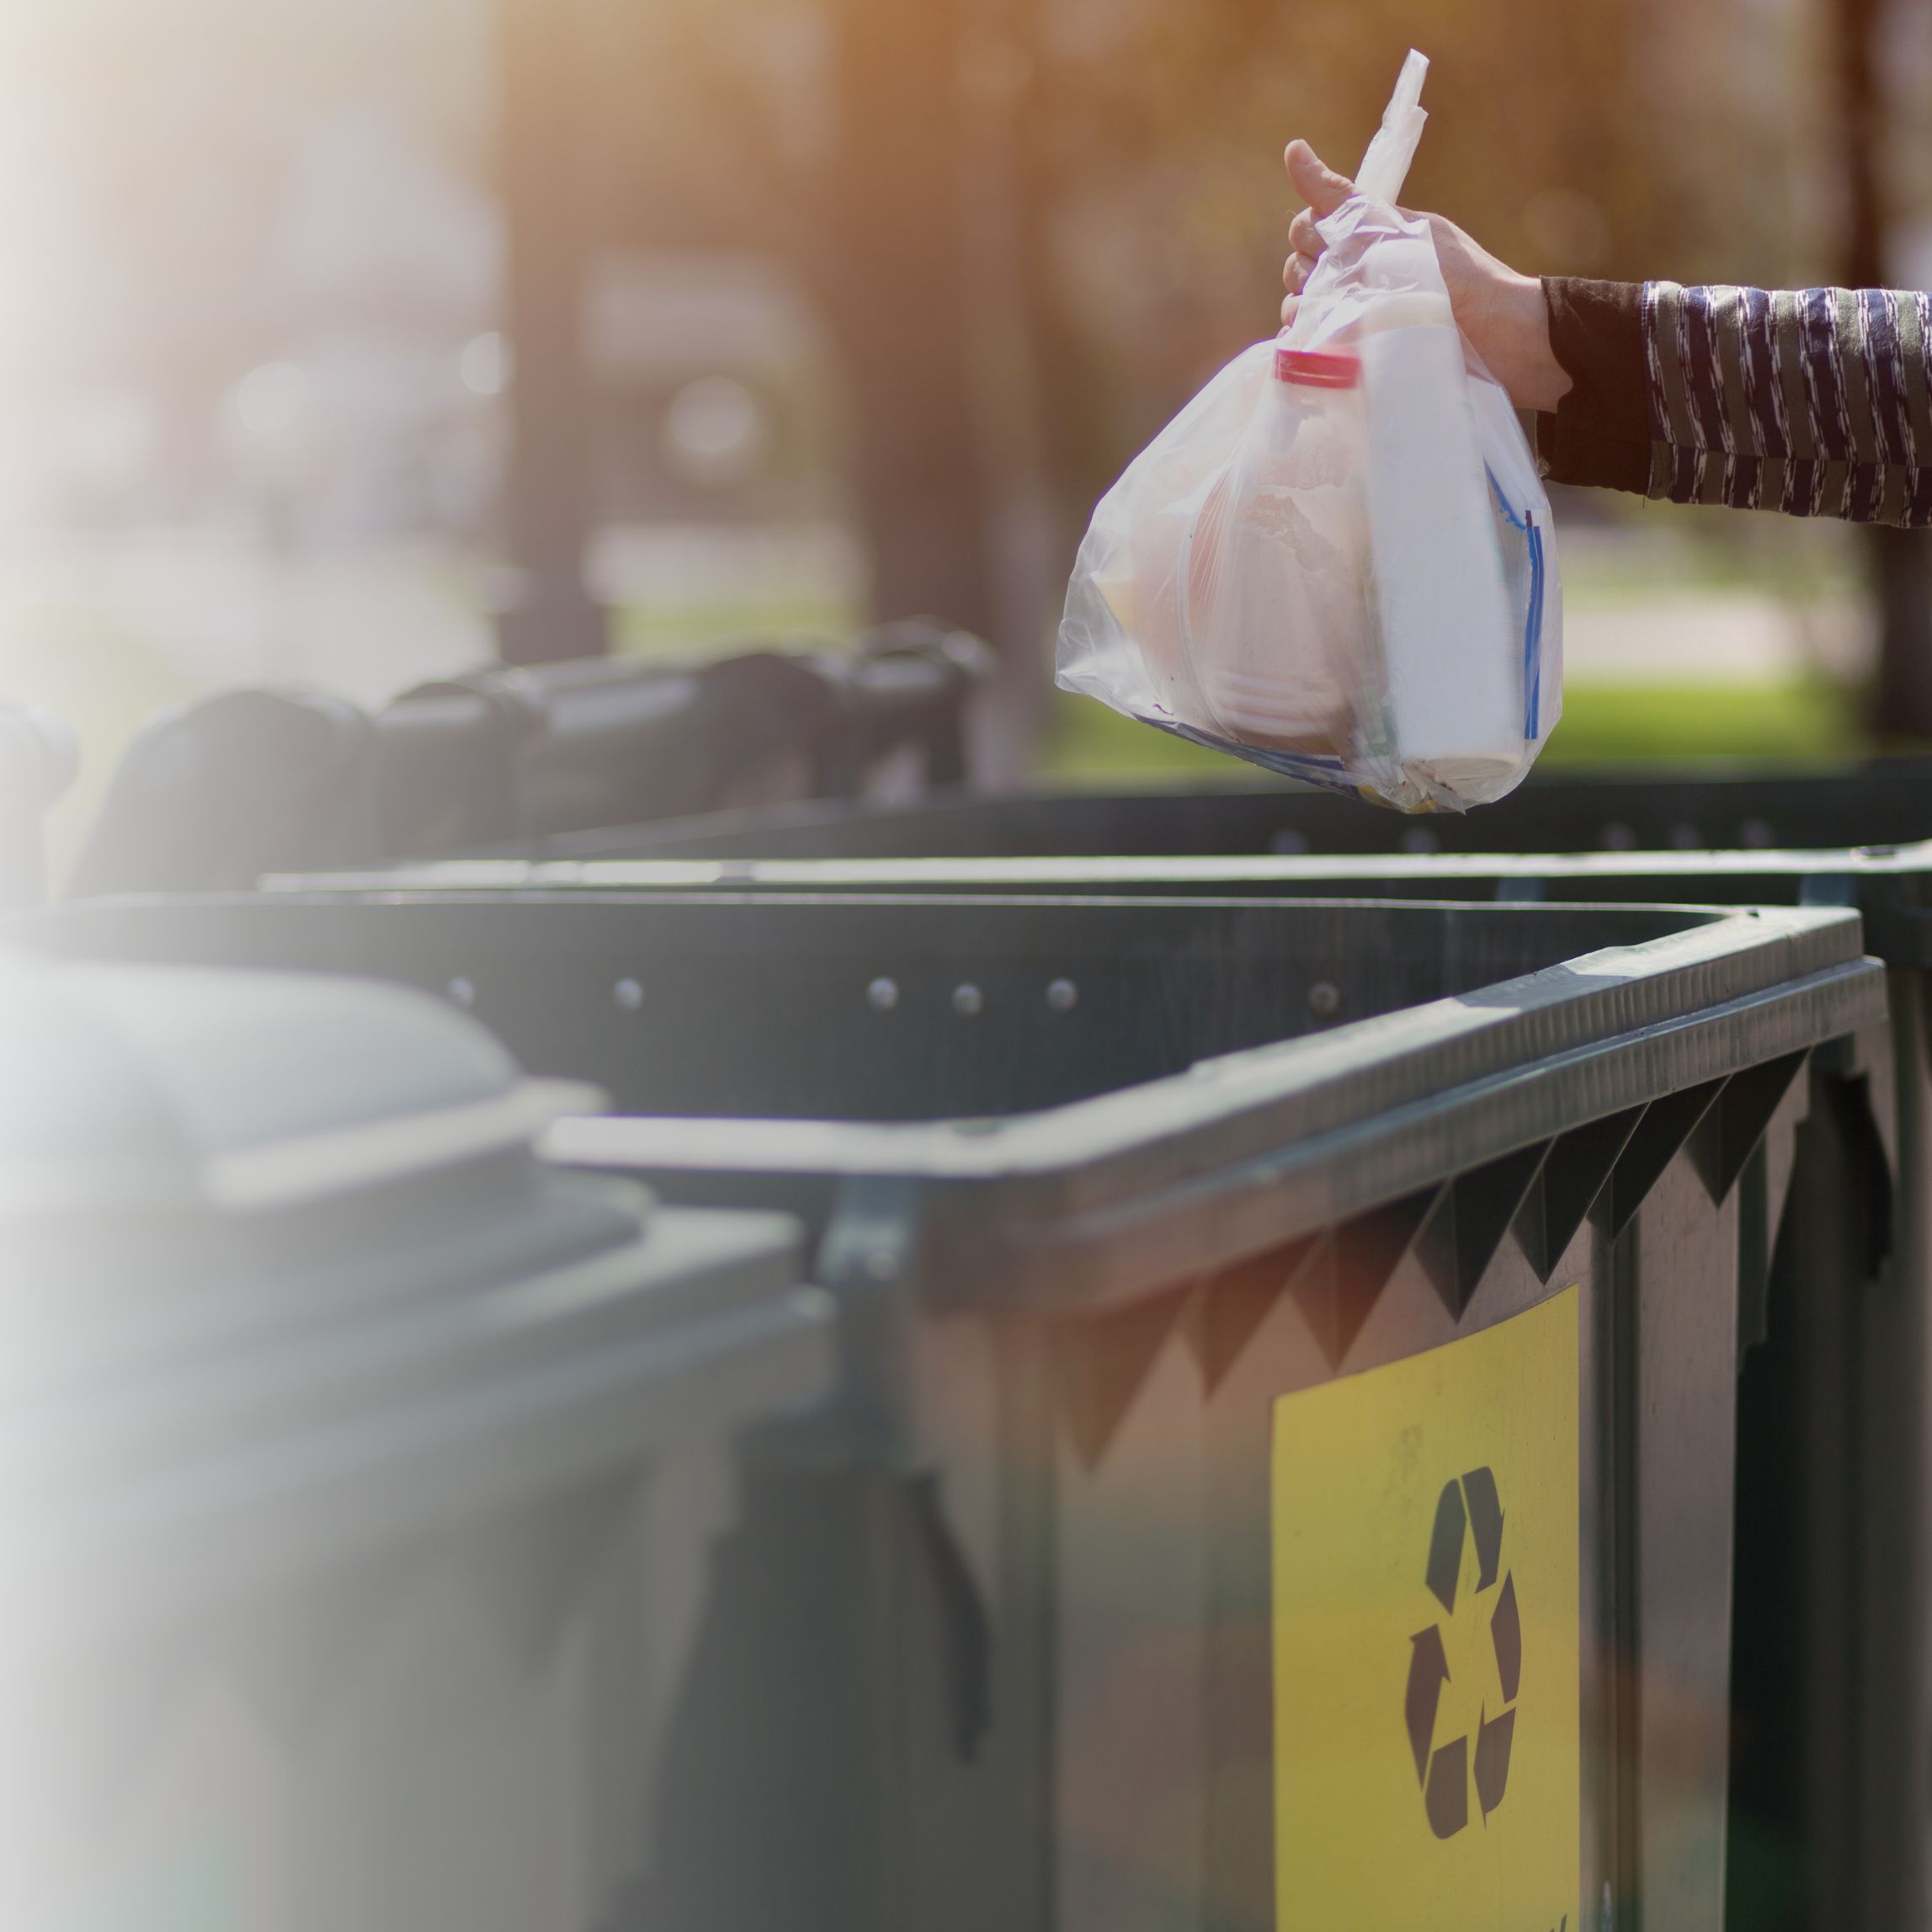 We Want Your Feedback: Single-Hauler Trash & Recycling Collection